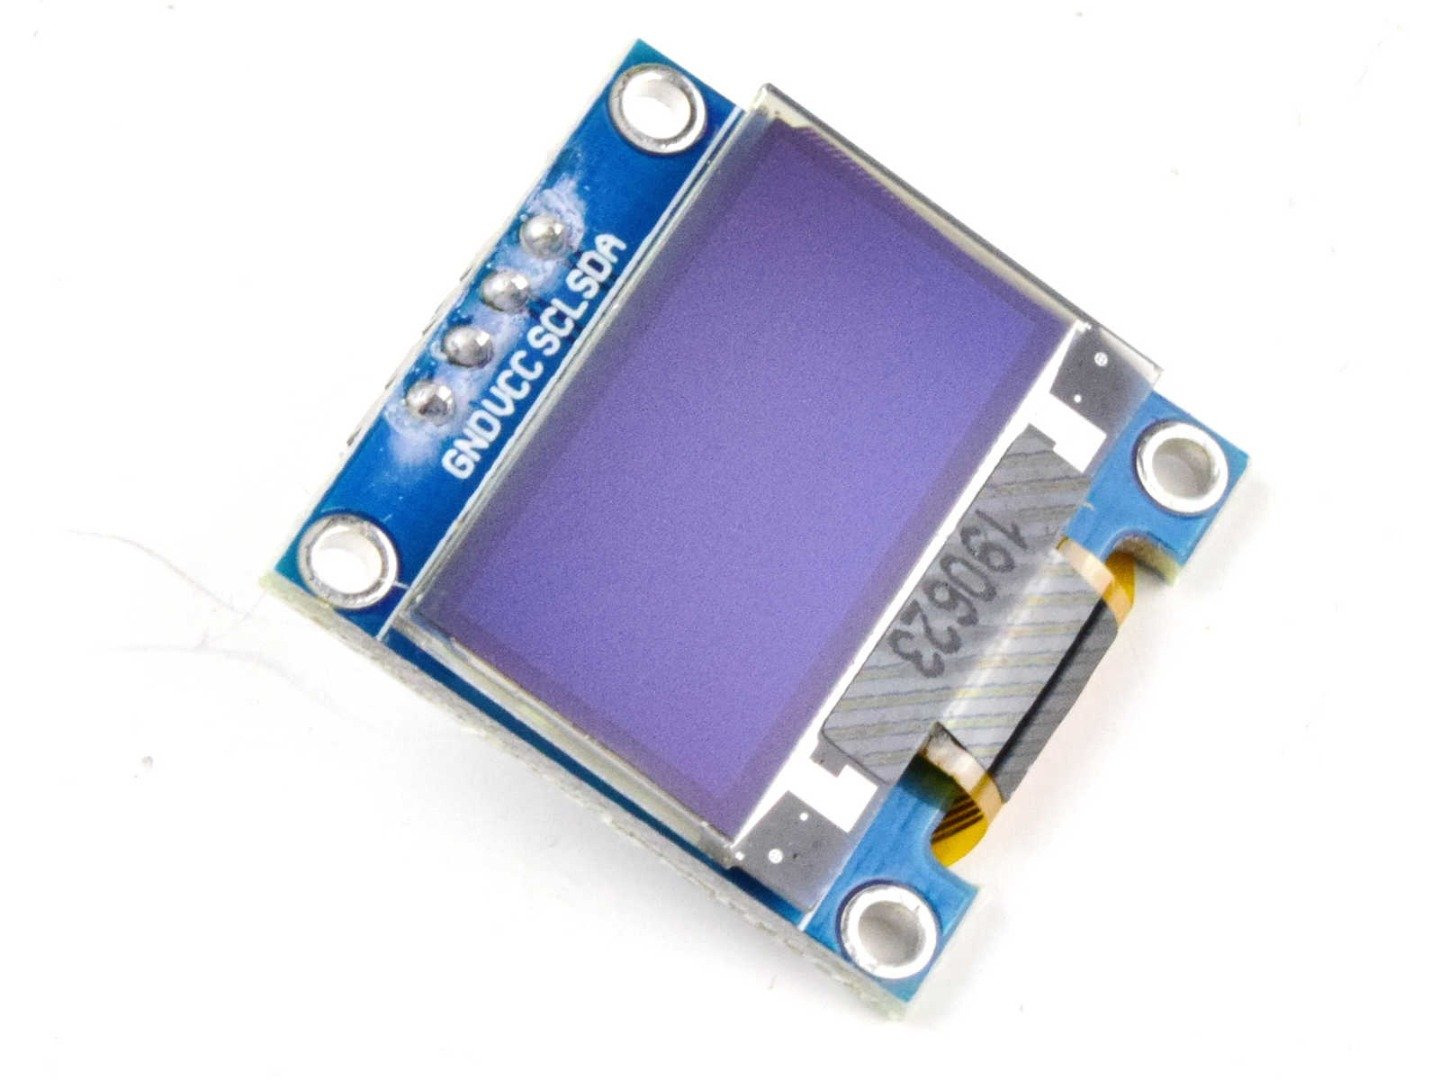 OLED 128×64 Pixel, I2C, 0.96 inch, SSD1306 SH1106, 3-5V (100% compatible with Arduino) 4